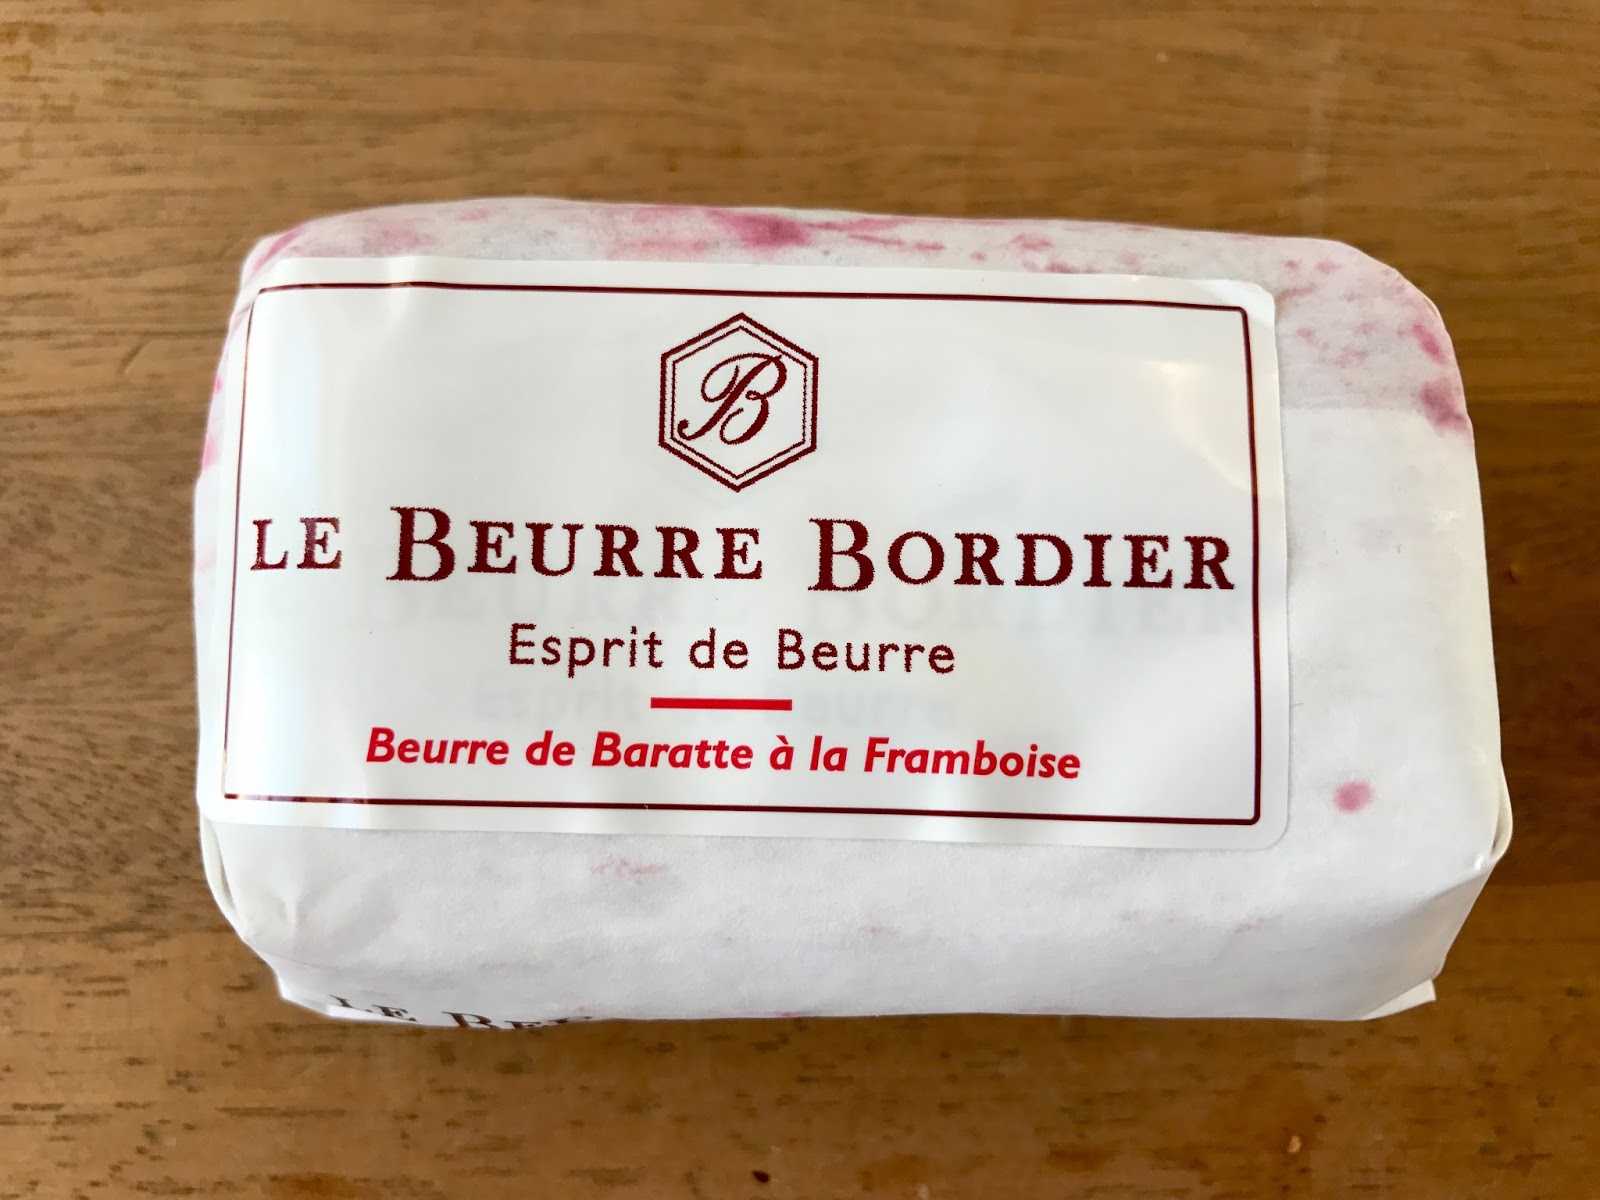 Bordier Butter - The Best Butter in France